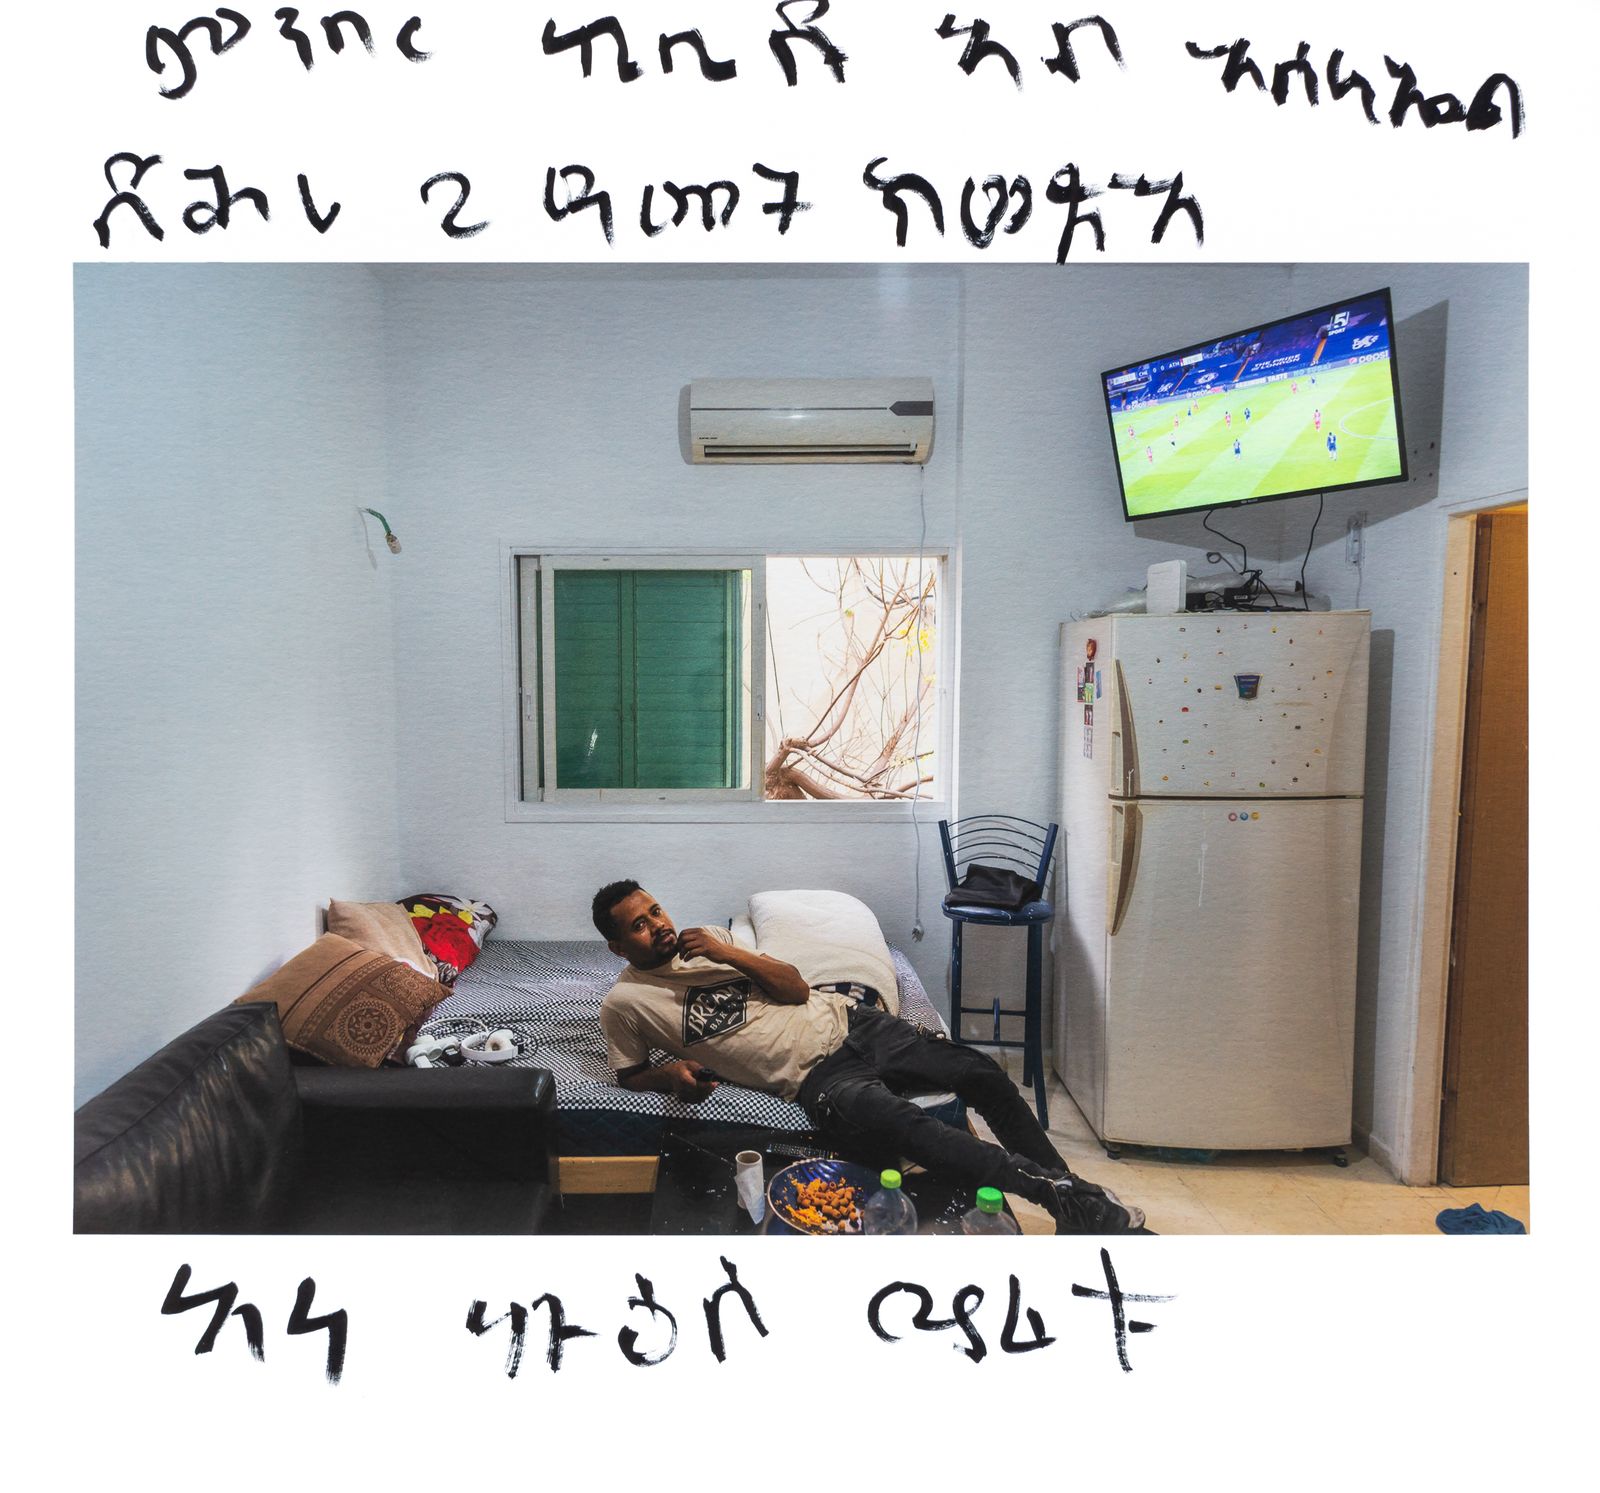 © Daniel Rolider - Image from the In Hadar Going Nowhere photography project